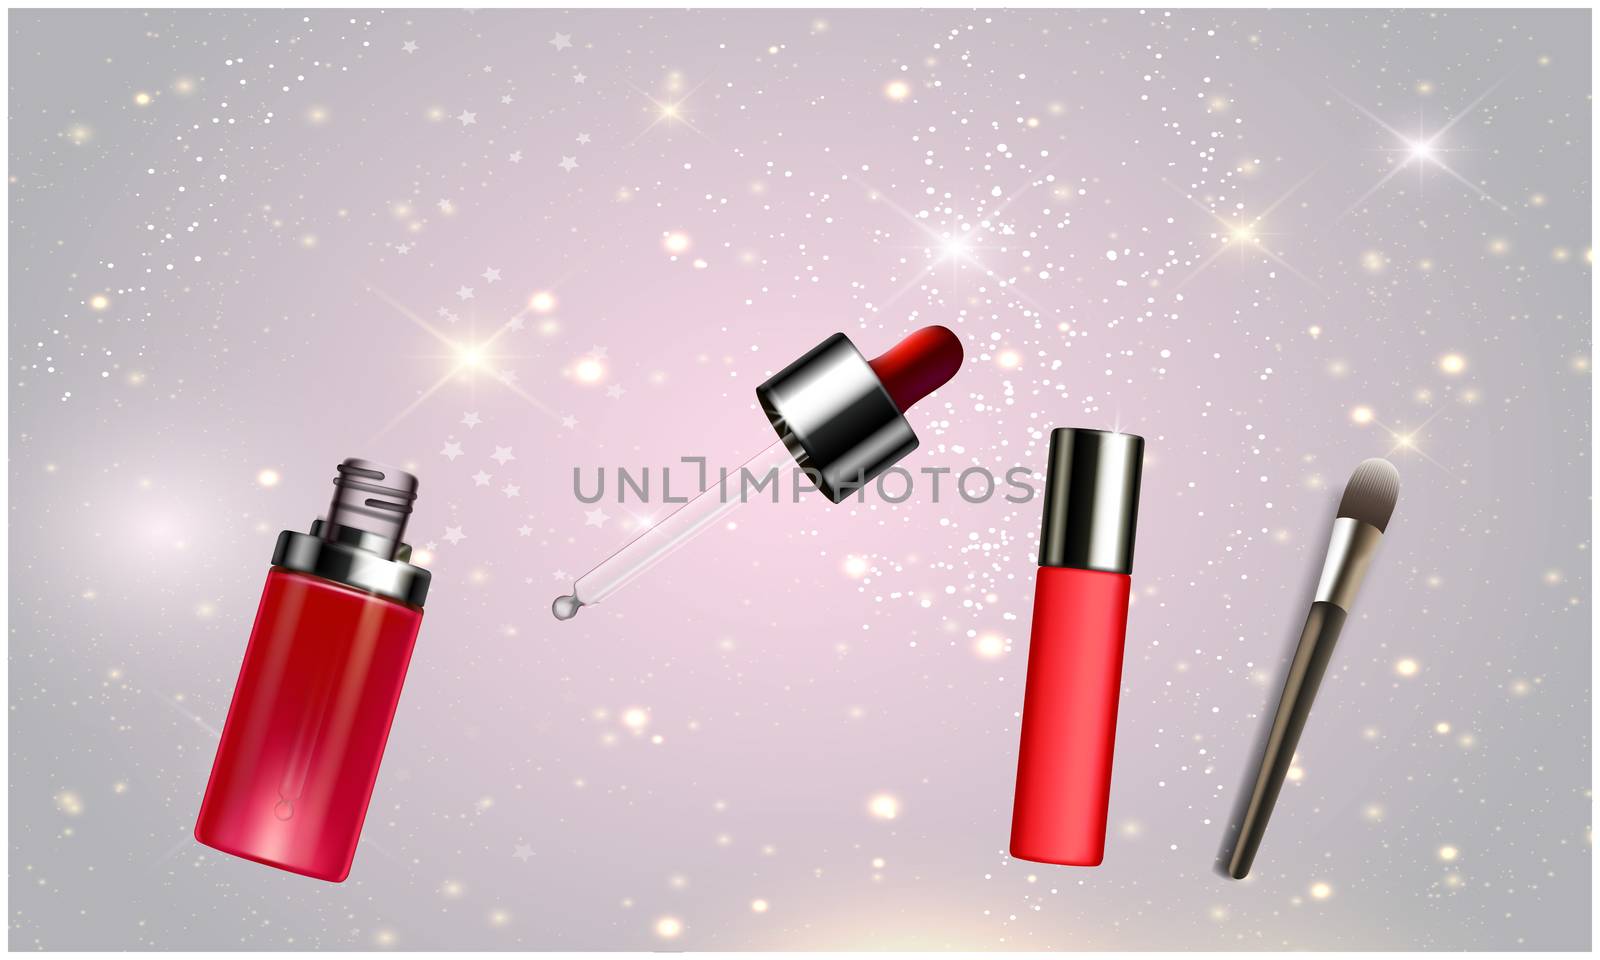 mock up illustration of cosmetic product on abstract background by aanavcreationsplus